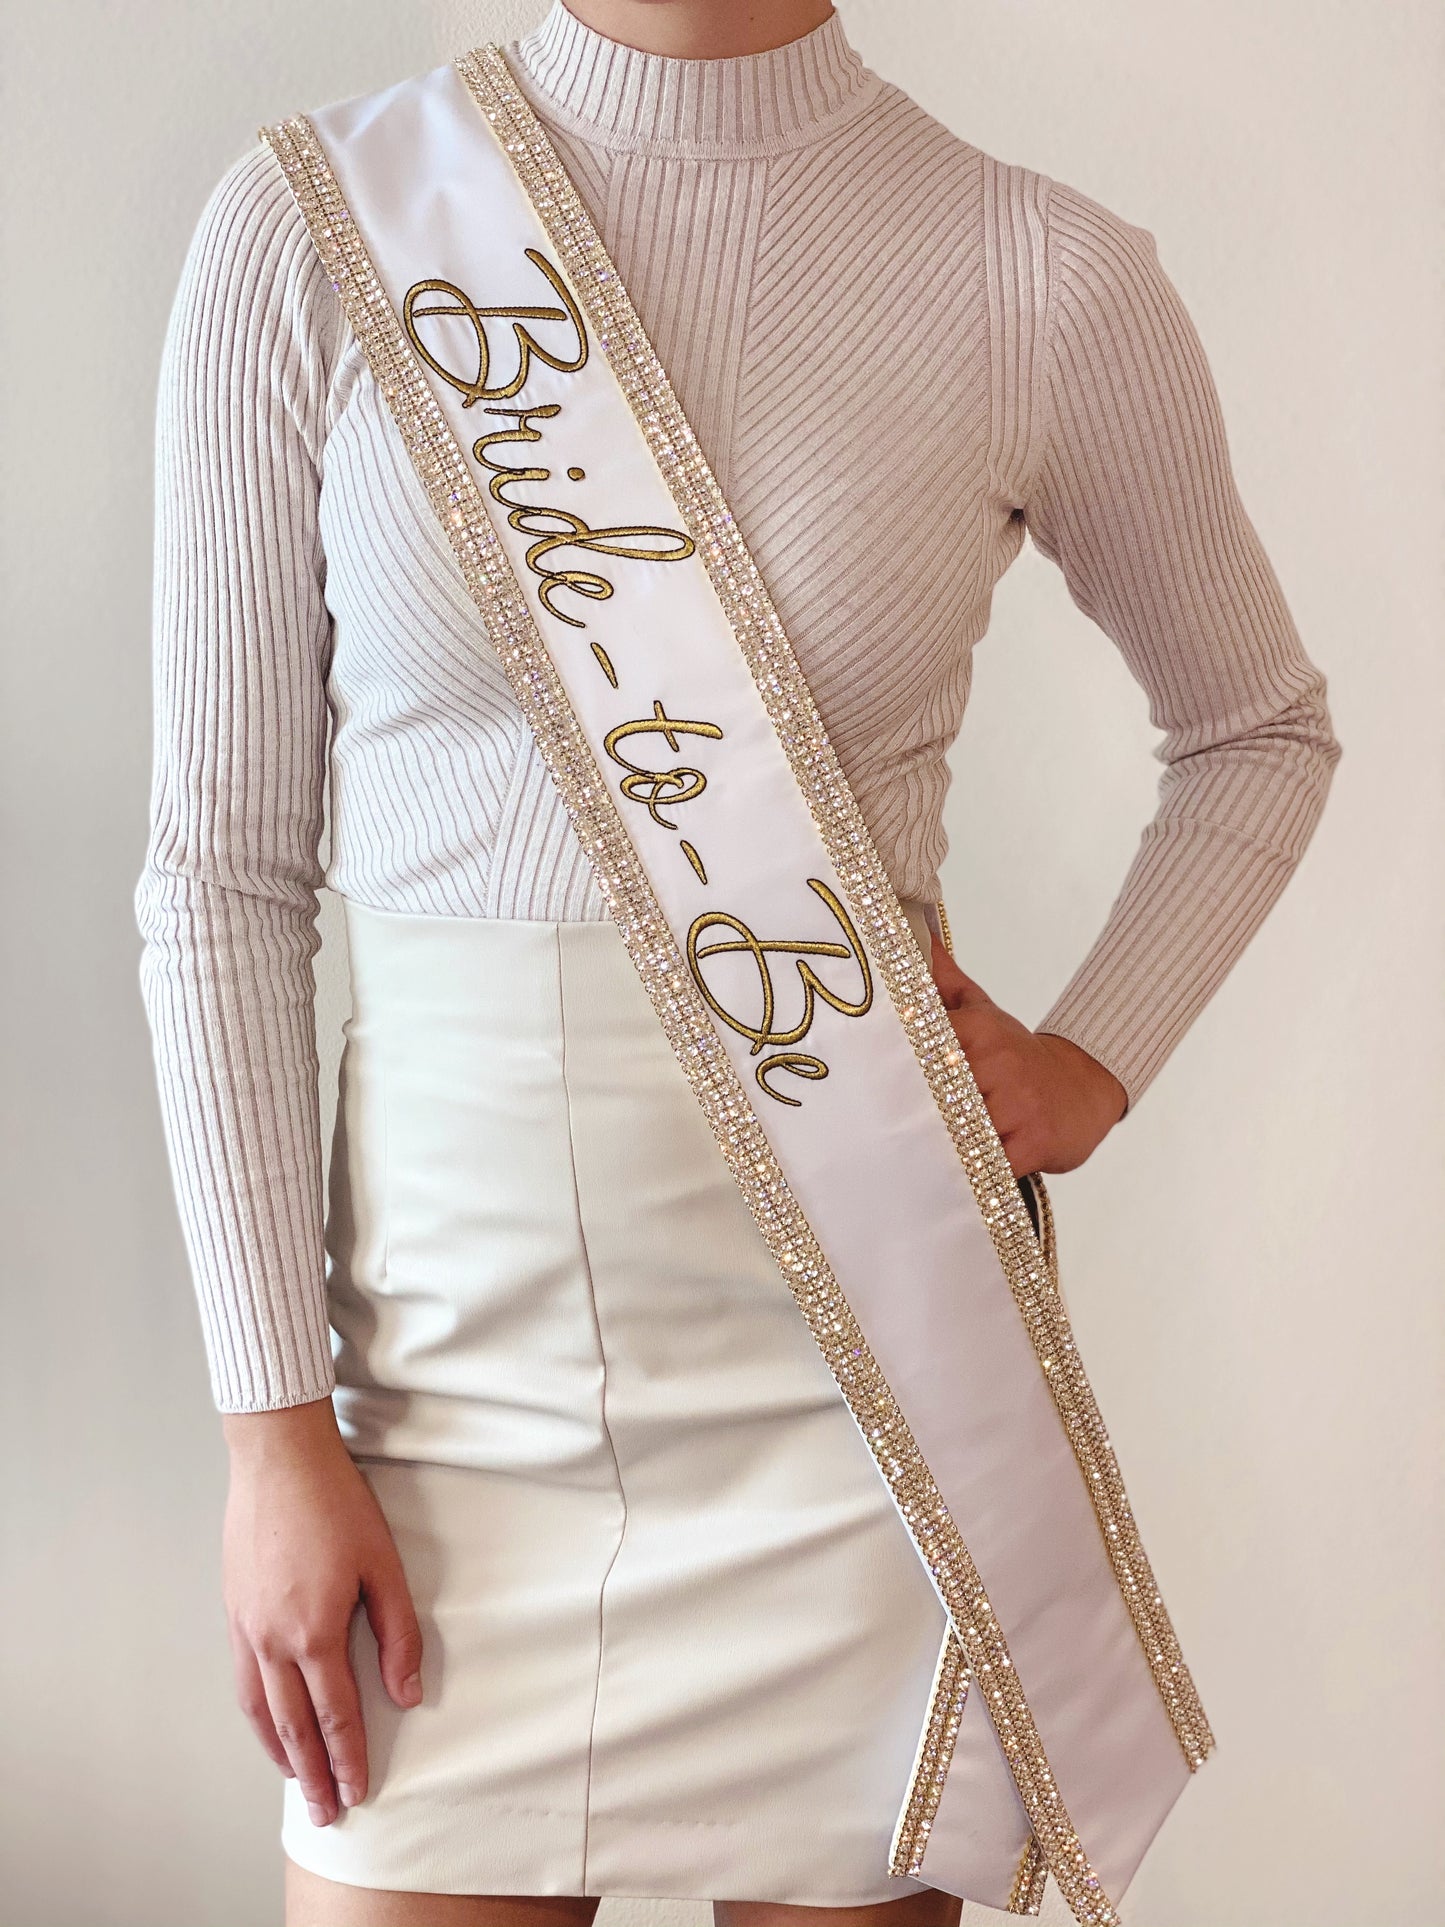 The Glamour 'Bride-To-Be' Sash